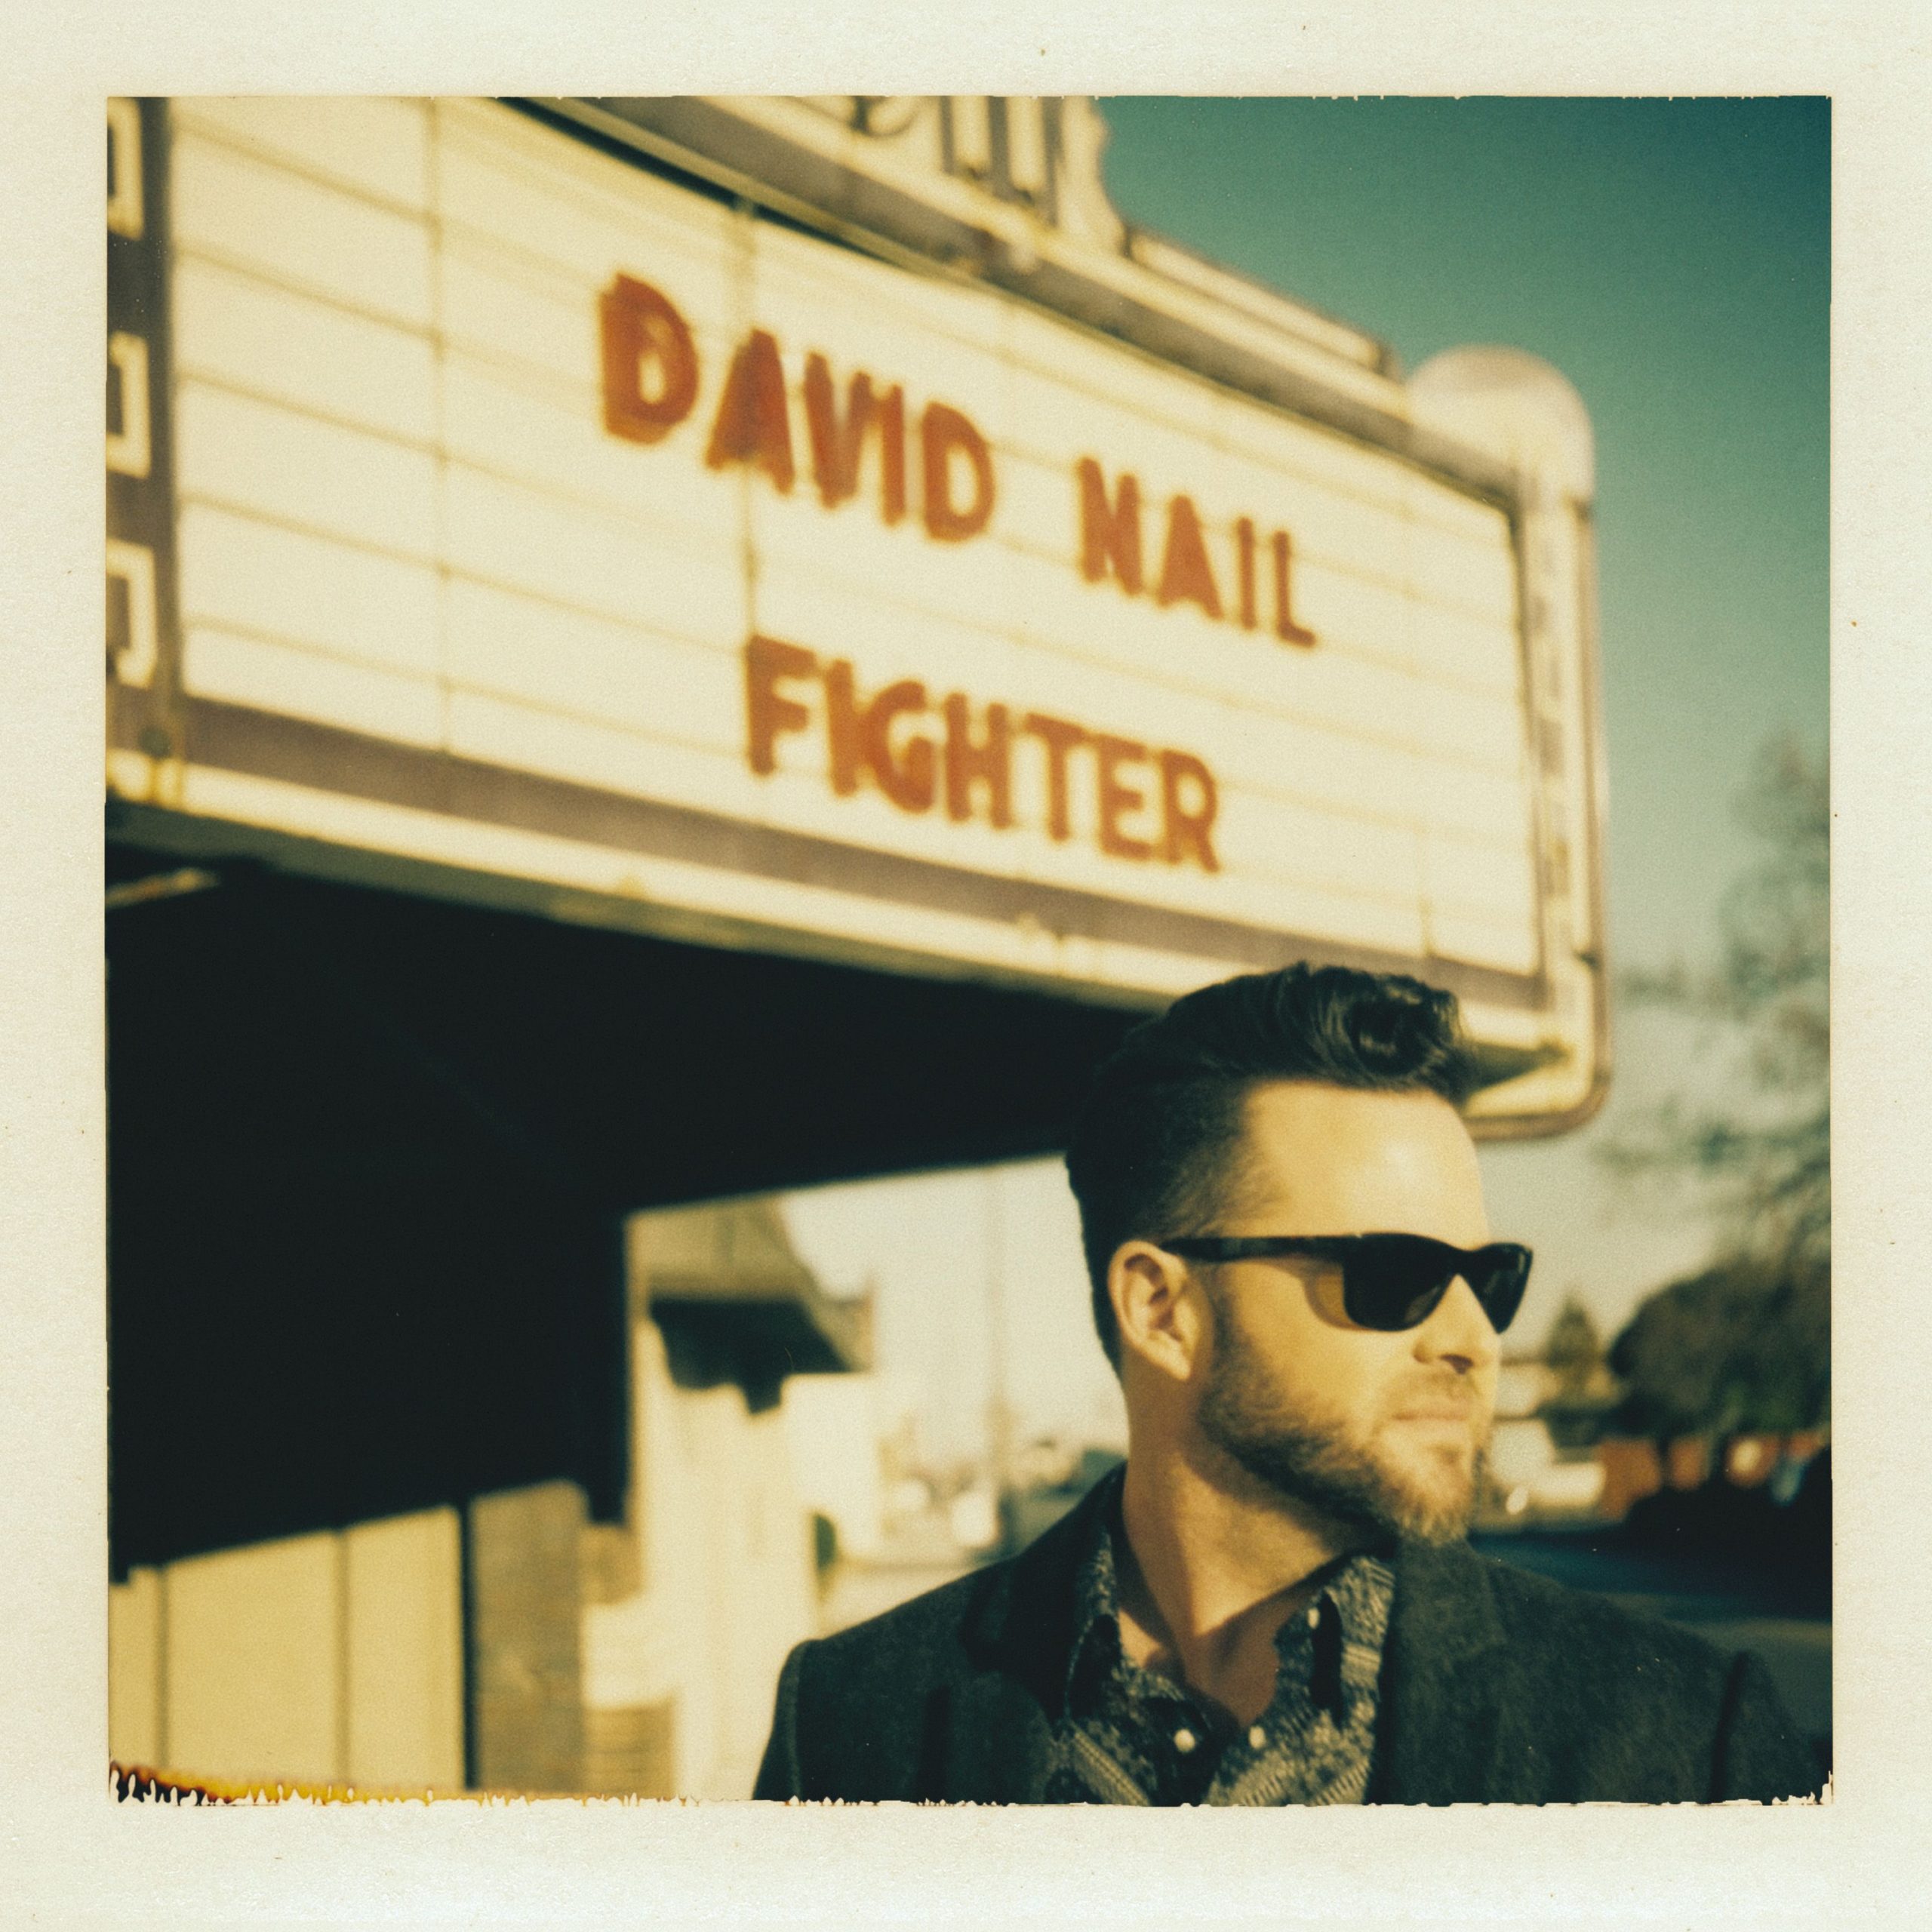 David Nail Releases Fourth Studio Album FIGHTER with  Performance on NBC’s TODAY Monday, July 18